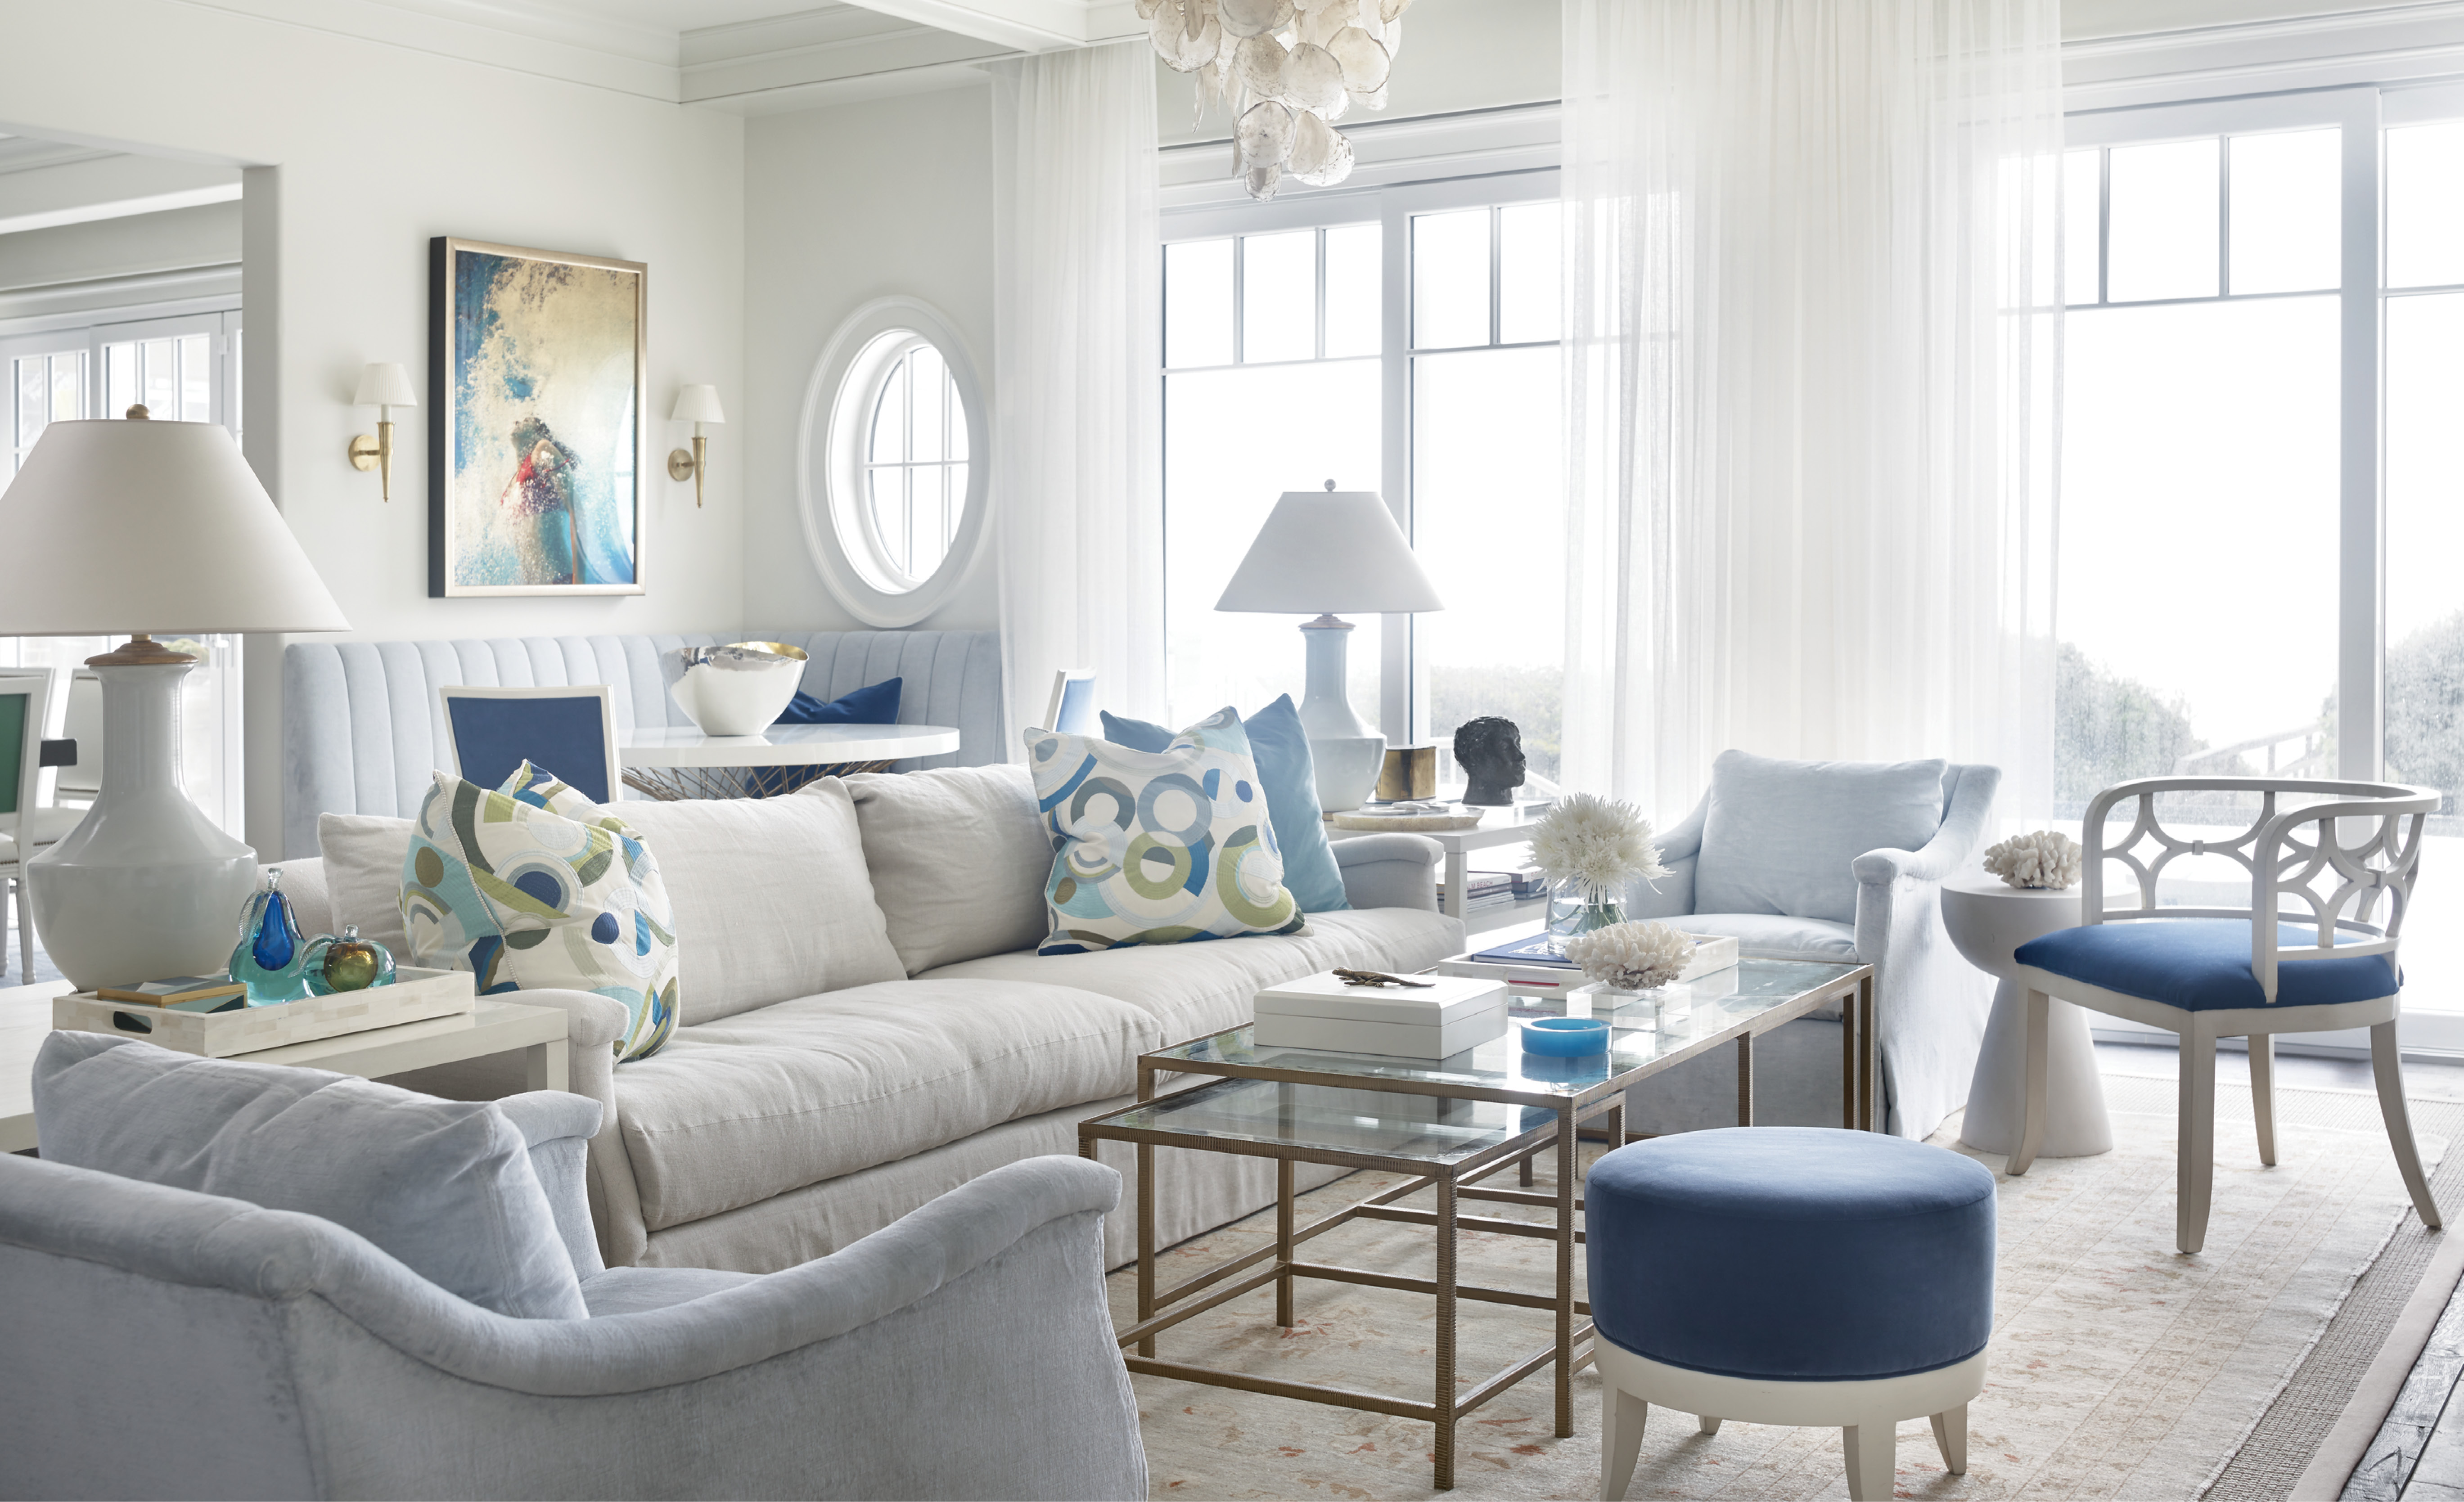 Leah and Gee Aldridge spent a decade planning and collecting for their custom beach house on Kiawah Island. The interiors are peppered with meaningful mementos, such as the painting by artist Eric Zener that the couple found in a Boston gallery and now hangs over the banquette.